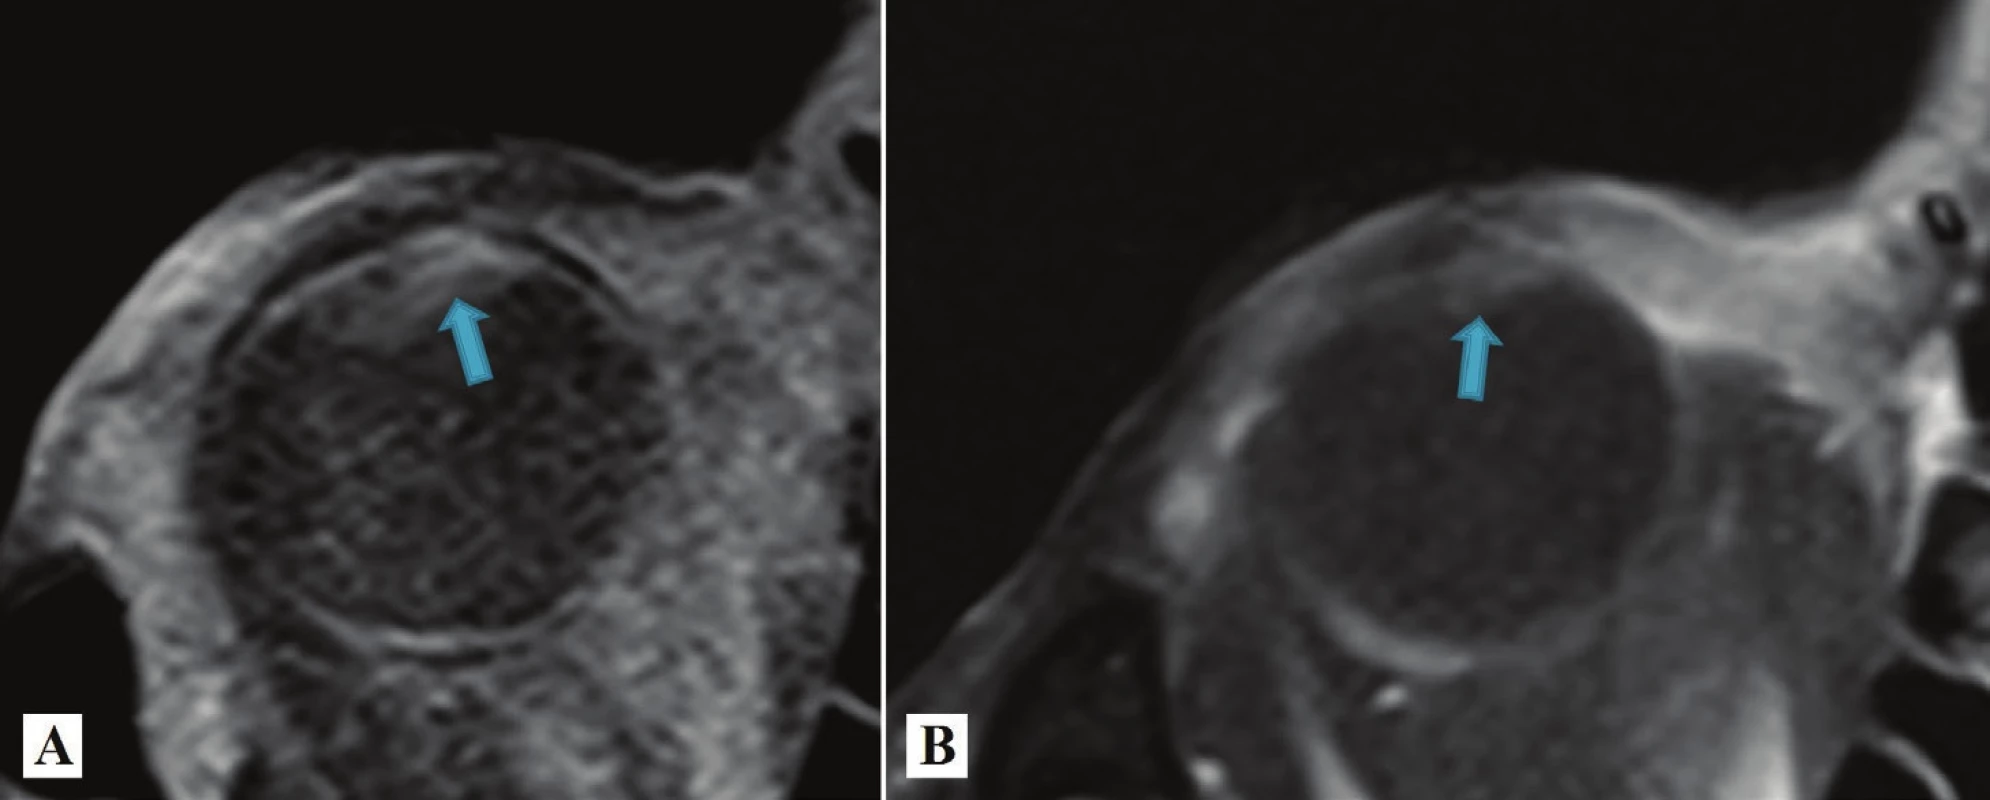 Comparison of MR images of patients in 2012 before irradiation (A) and in 2015, i.e. 3 years after irradiation there is visible reduction of the volume of the tumour (B)